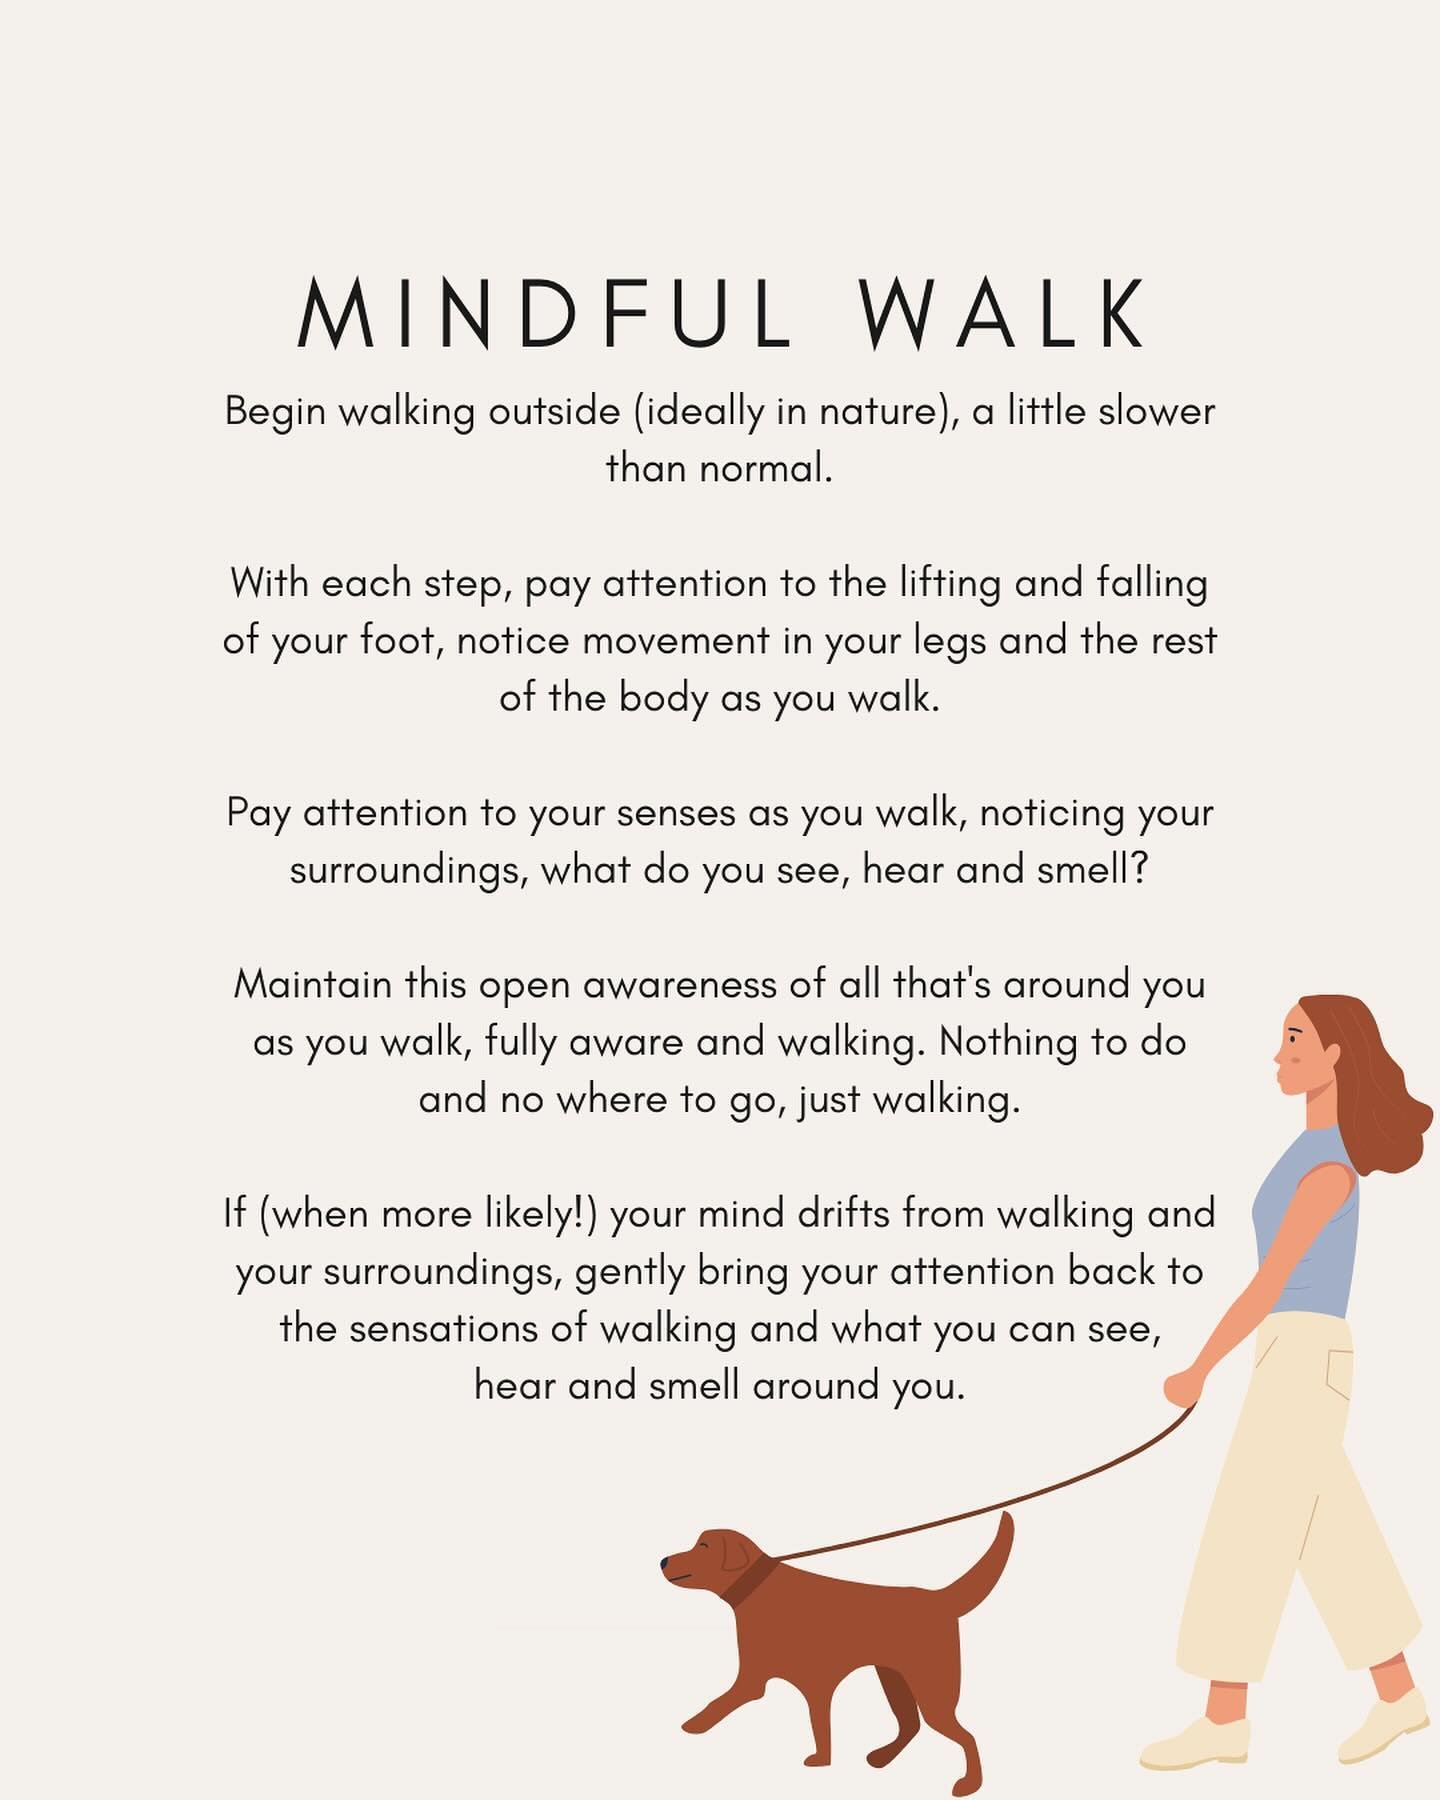 Take a step outside and let nature be your guide 🌿 

Walking in nature not only boosts your physical health, but also your mental wellbeing. It&rsquo;s a great way to clear your mind, reduce stress, and gain a fresh perspective on life. 

So put on 